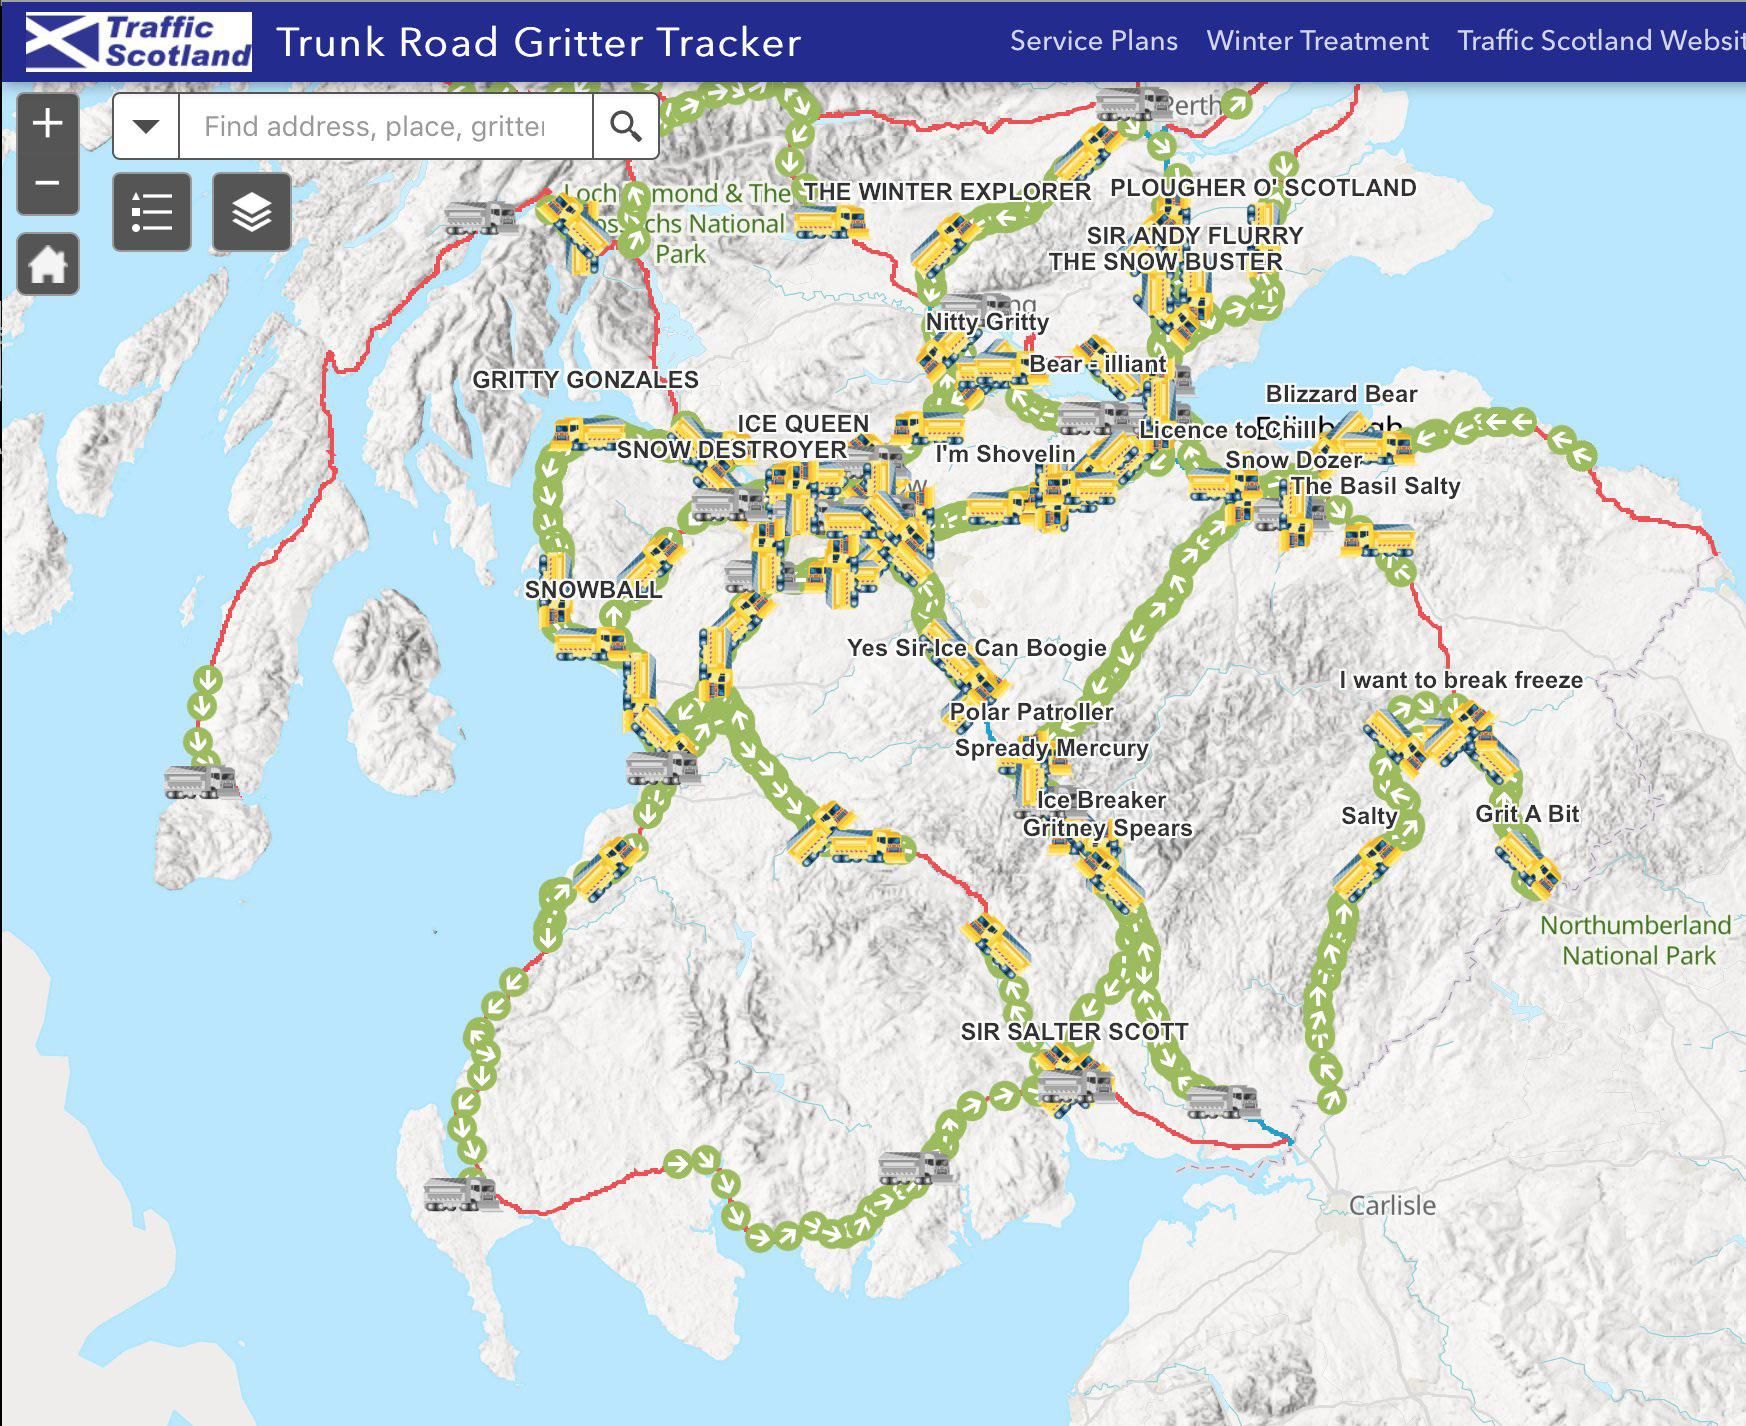 Scotland has named their road gritters and you can follow them live.